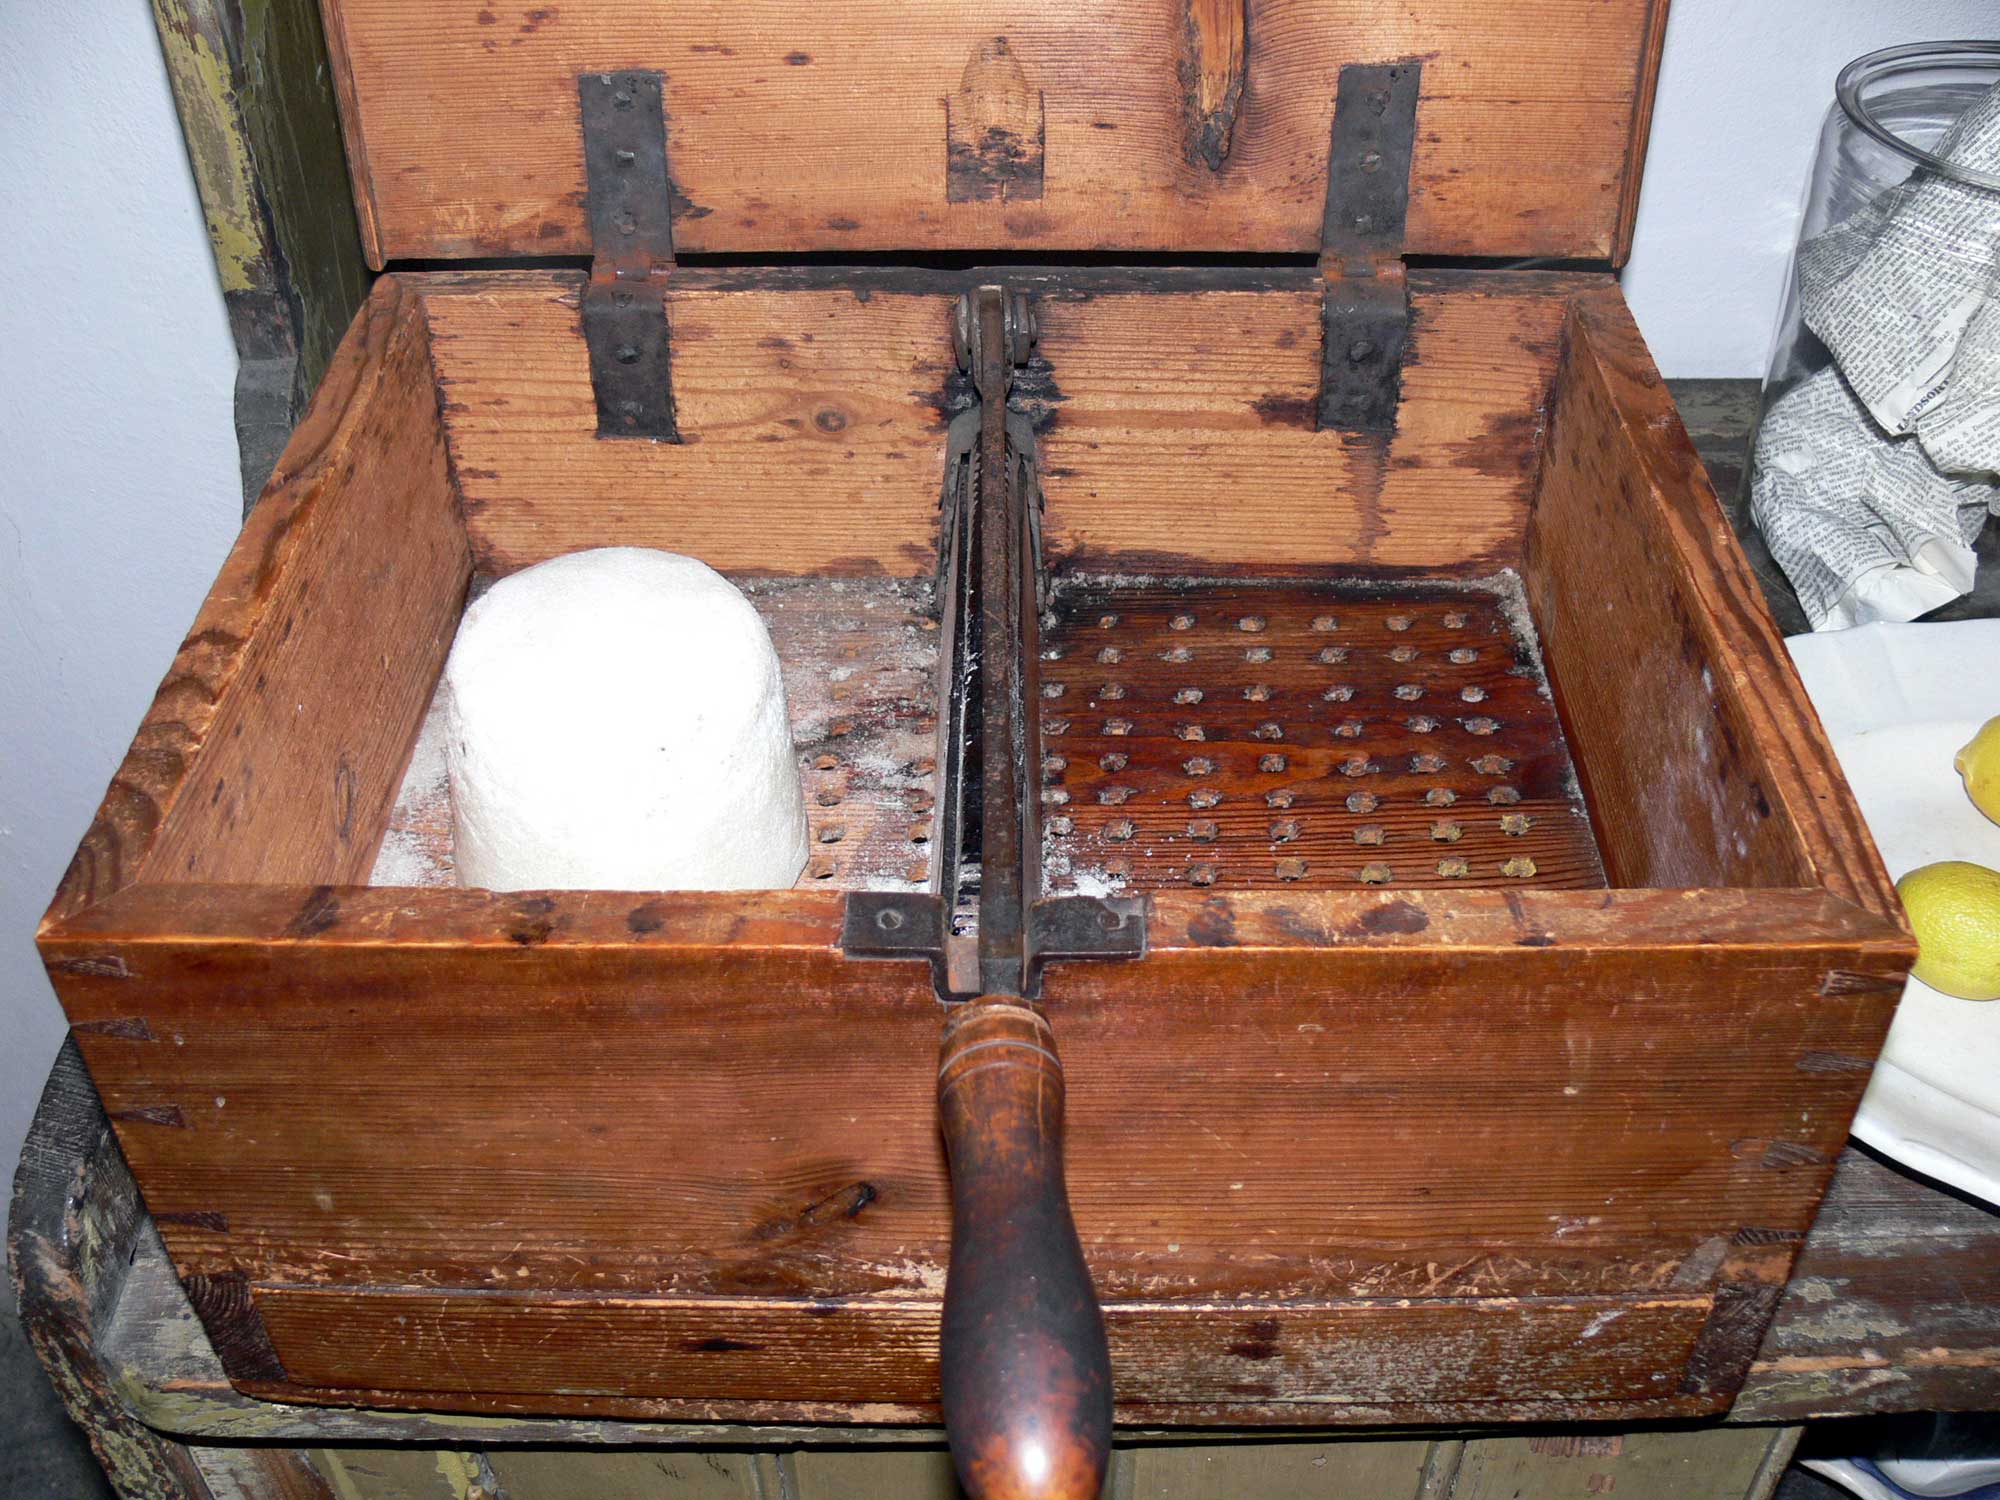 Photograph of a box used for cutting up sugar loaves. The photo shows a wooden box with a lid. The lid is open to show a knife for cutting the sugar loaf bisecting the box. The handle of the knife is sticking out of the box. Rows of holes in the bottom of the box lets sugar fall through the bottom, where it is presumably caught in a tray below.